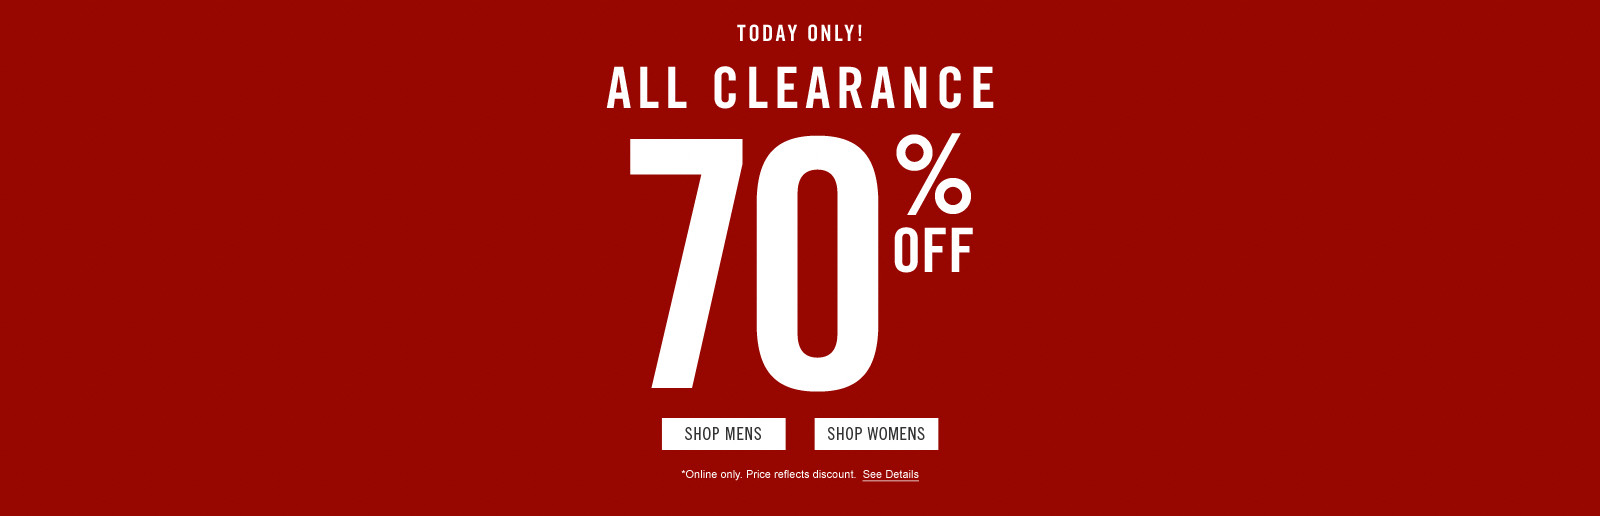 Clearance Items 70% Off Today Only + $5 